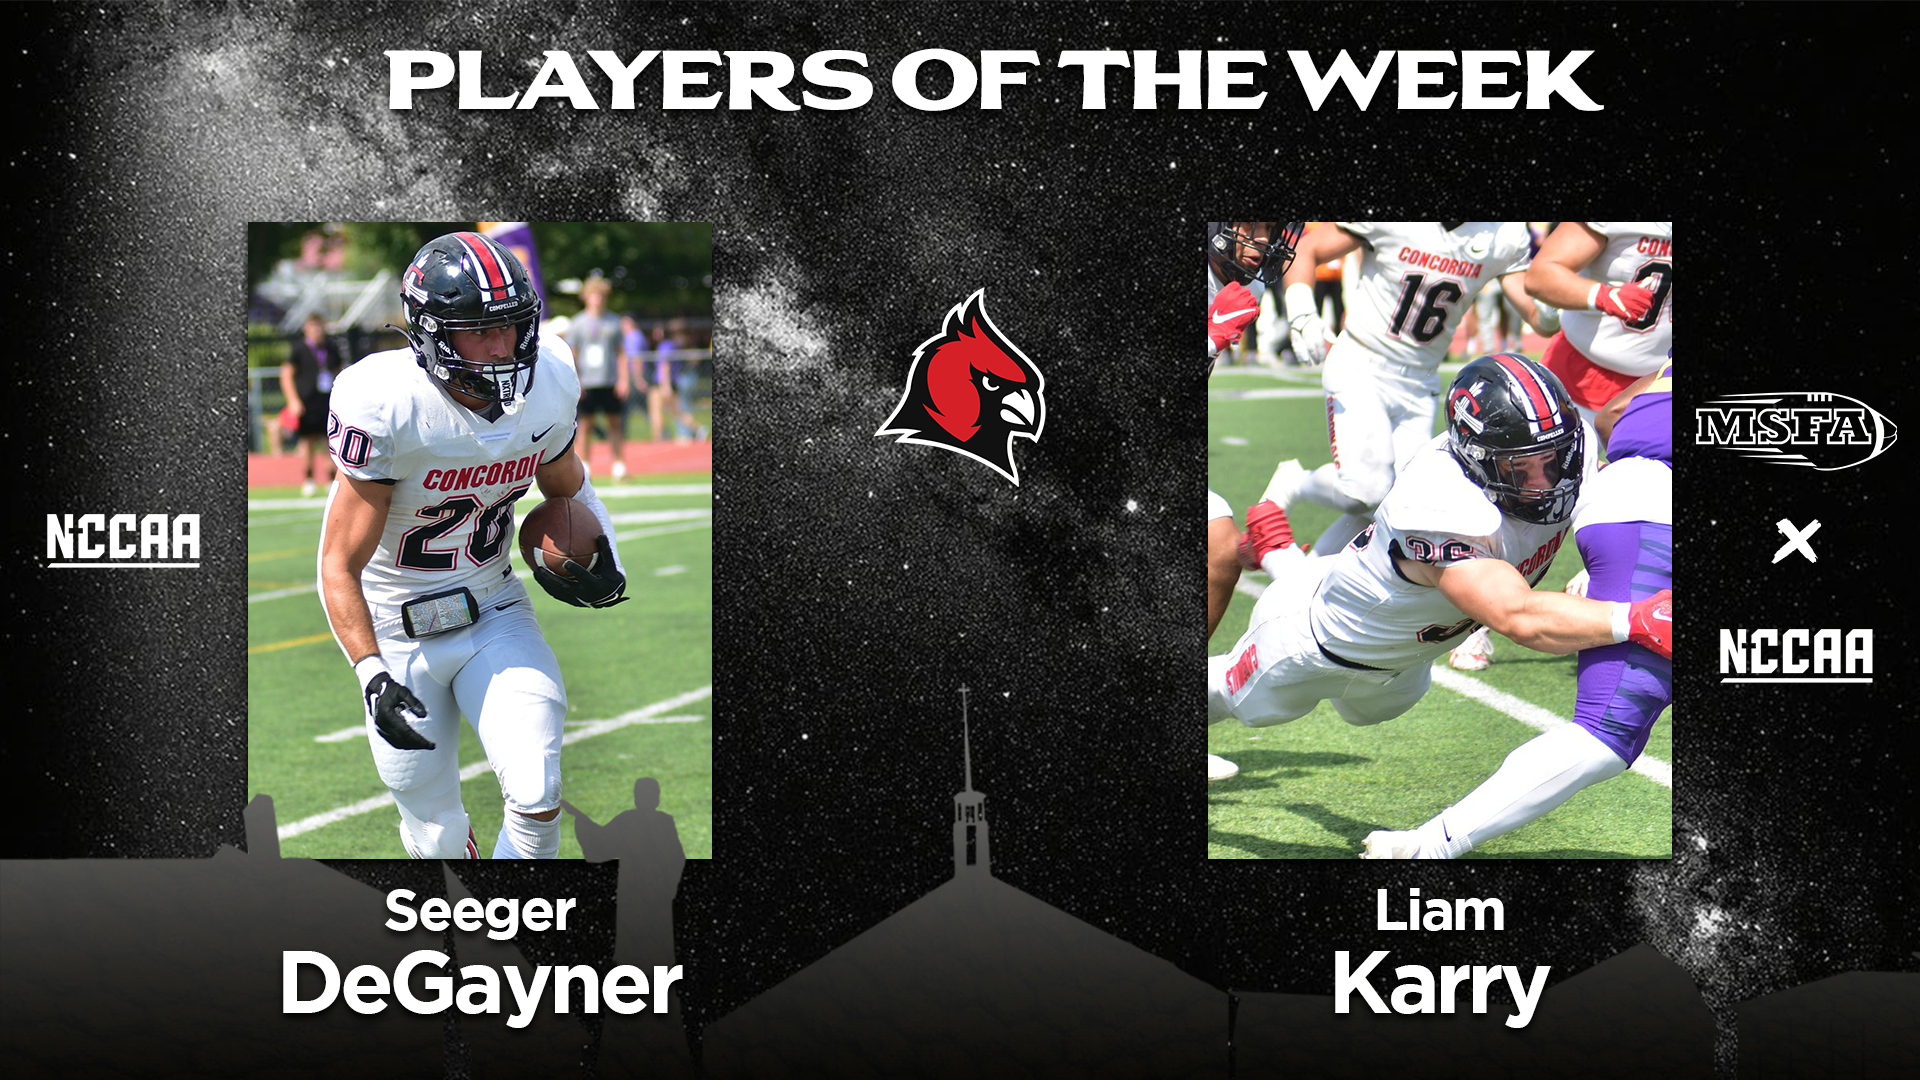 Football's Karry wins MSFA and NCCAA Player of the Week; Seeger DeGayner wins NCCAA Offensive Player of the Week